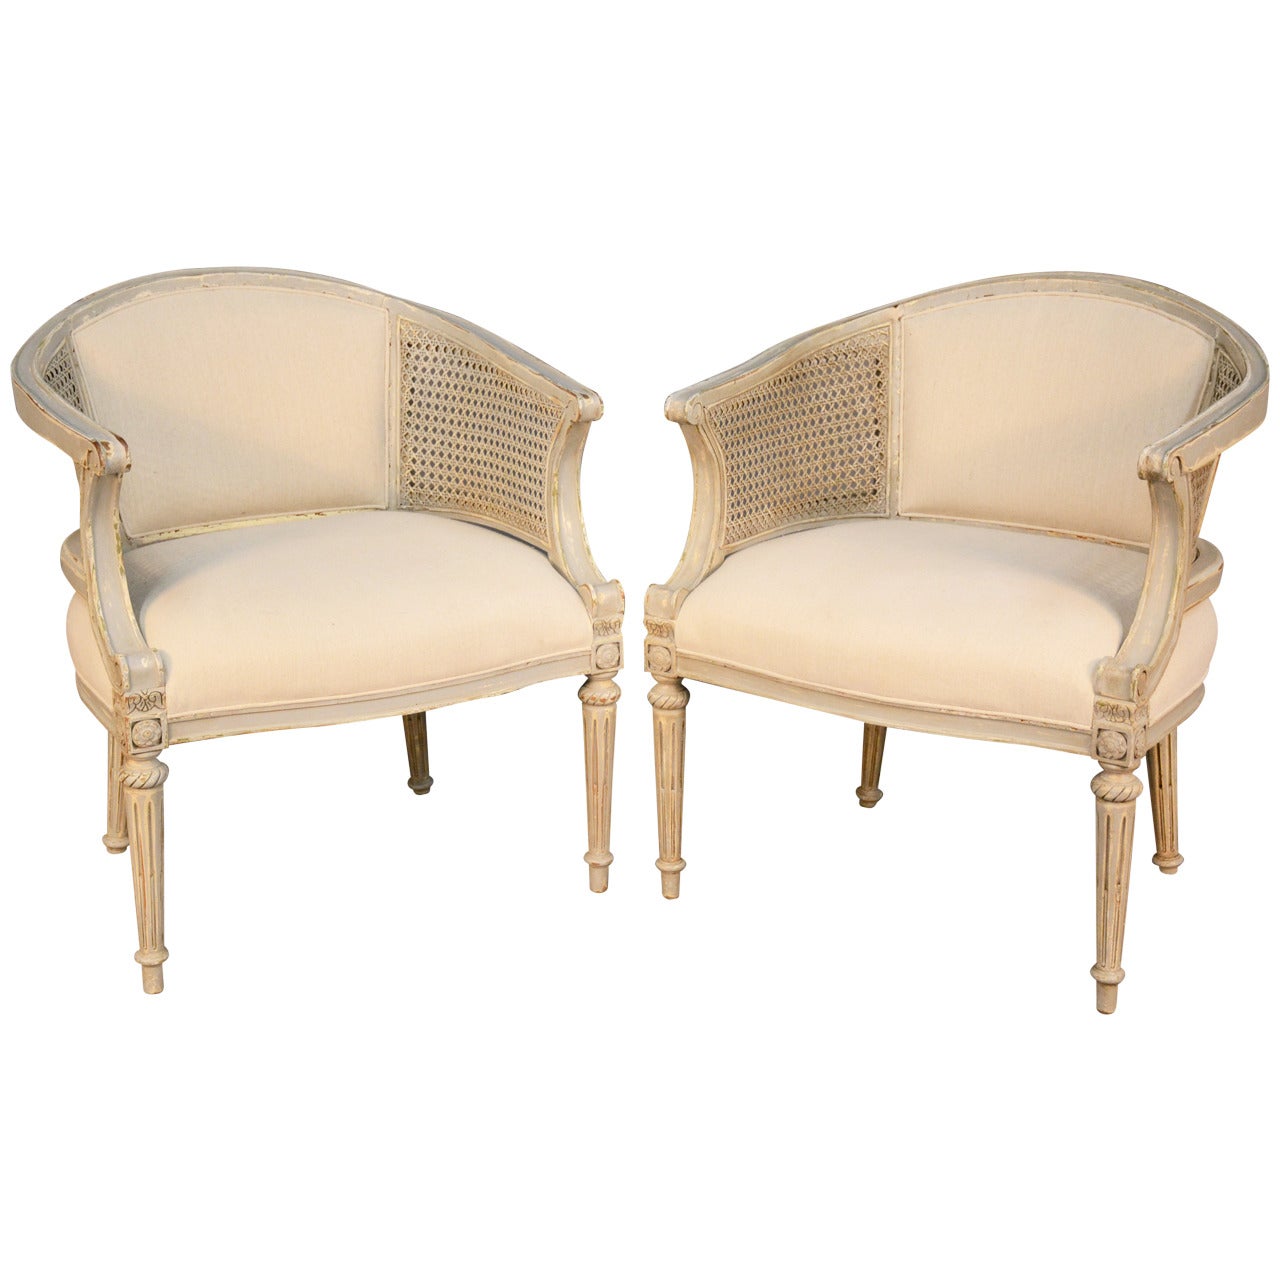 Pair of Louis XVI Style Caned Chairs For Sale